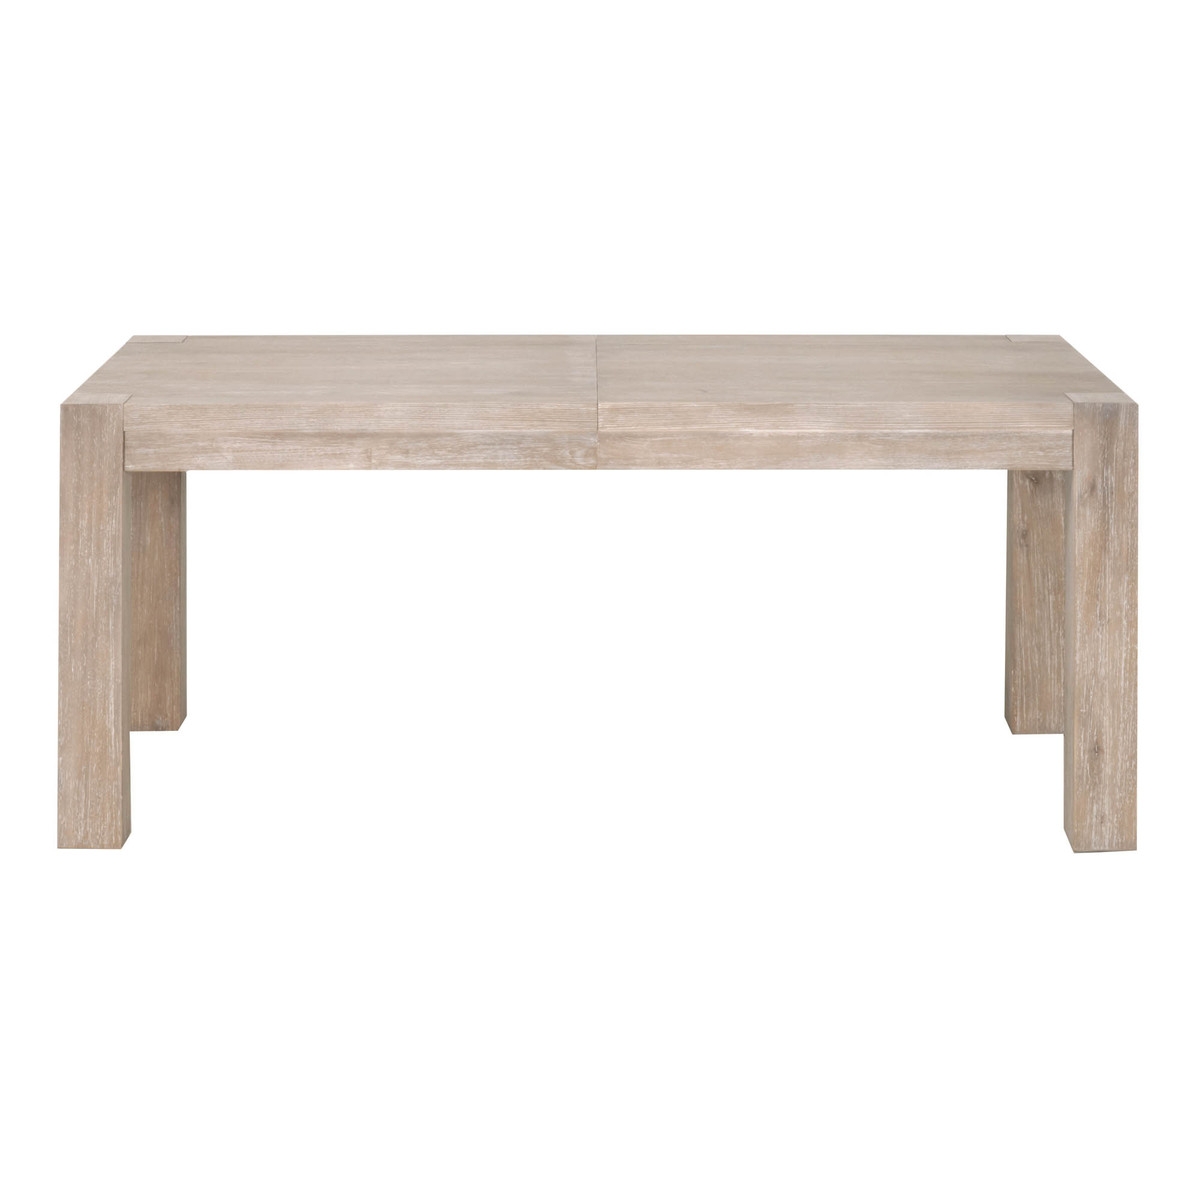 Adler Extension Dining Table - Image 3